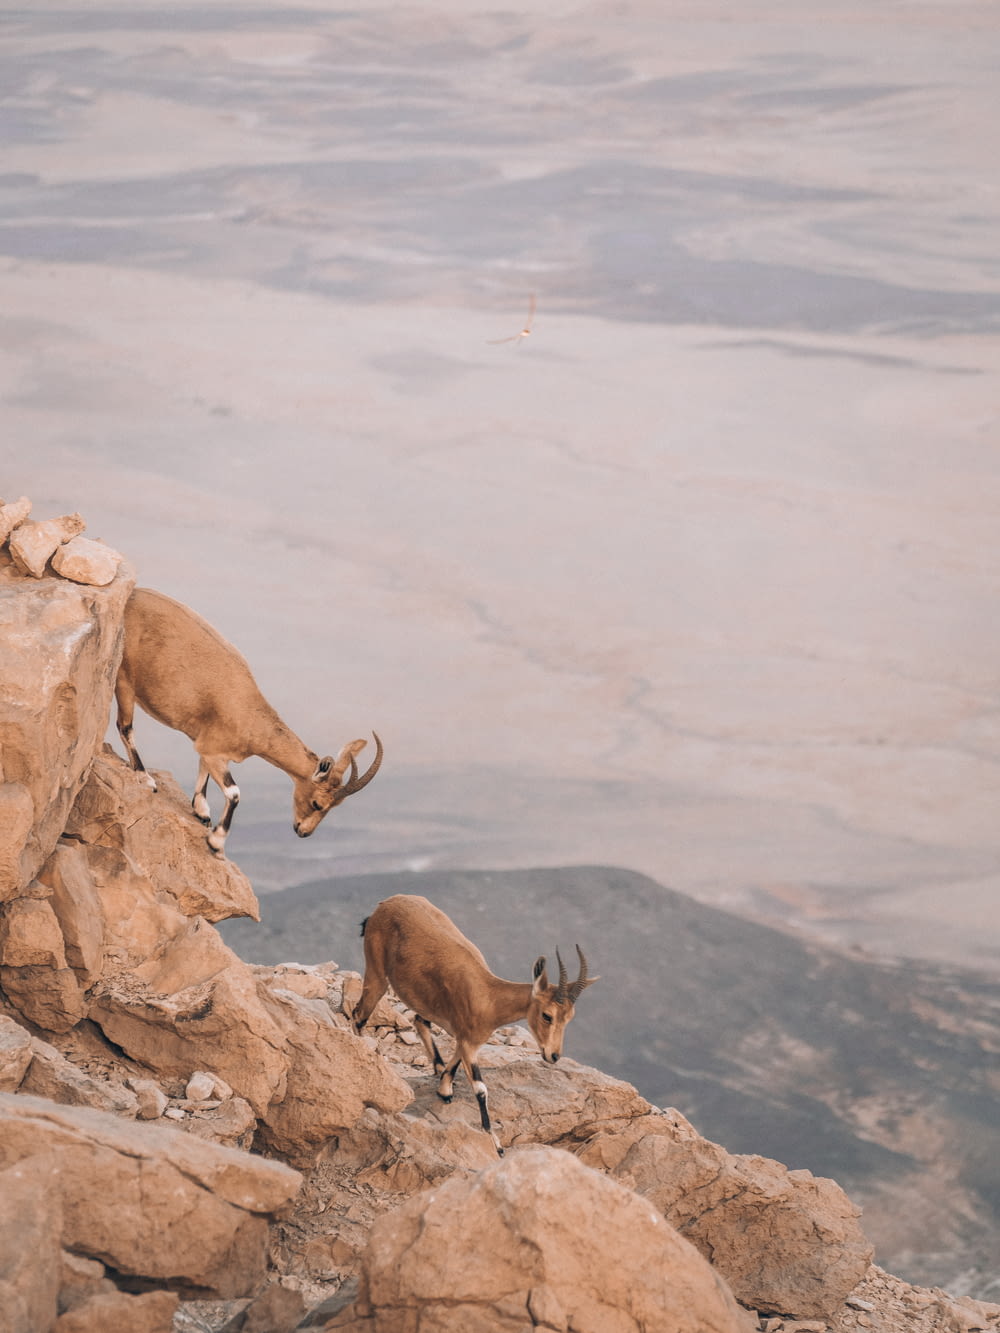 a group of animals walking on a rocky surface